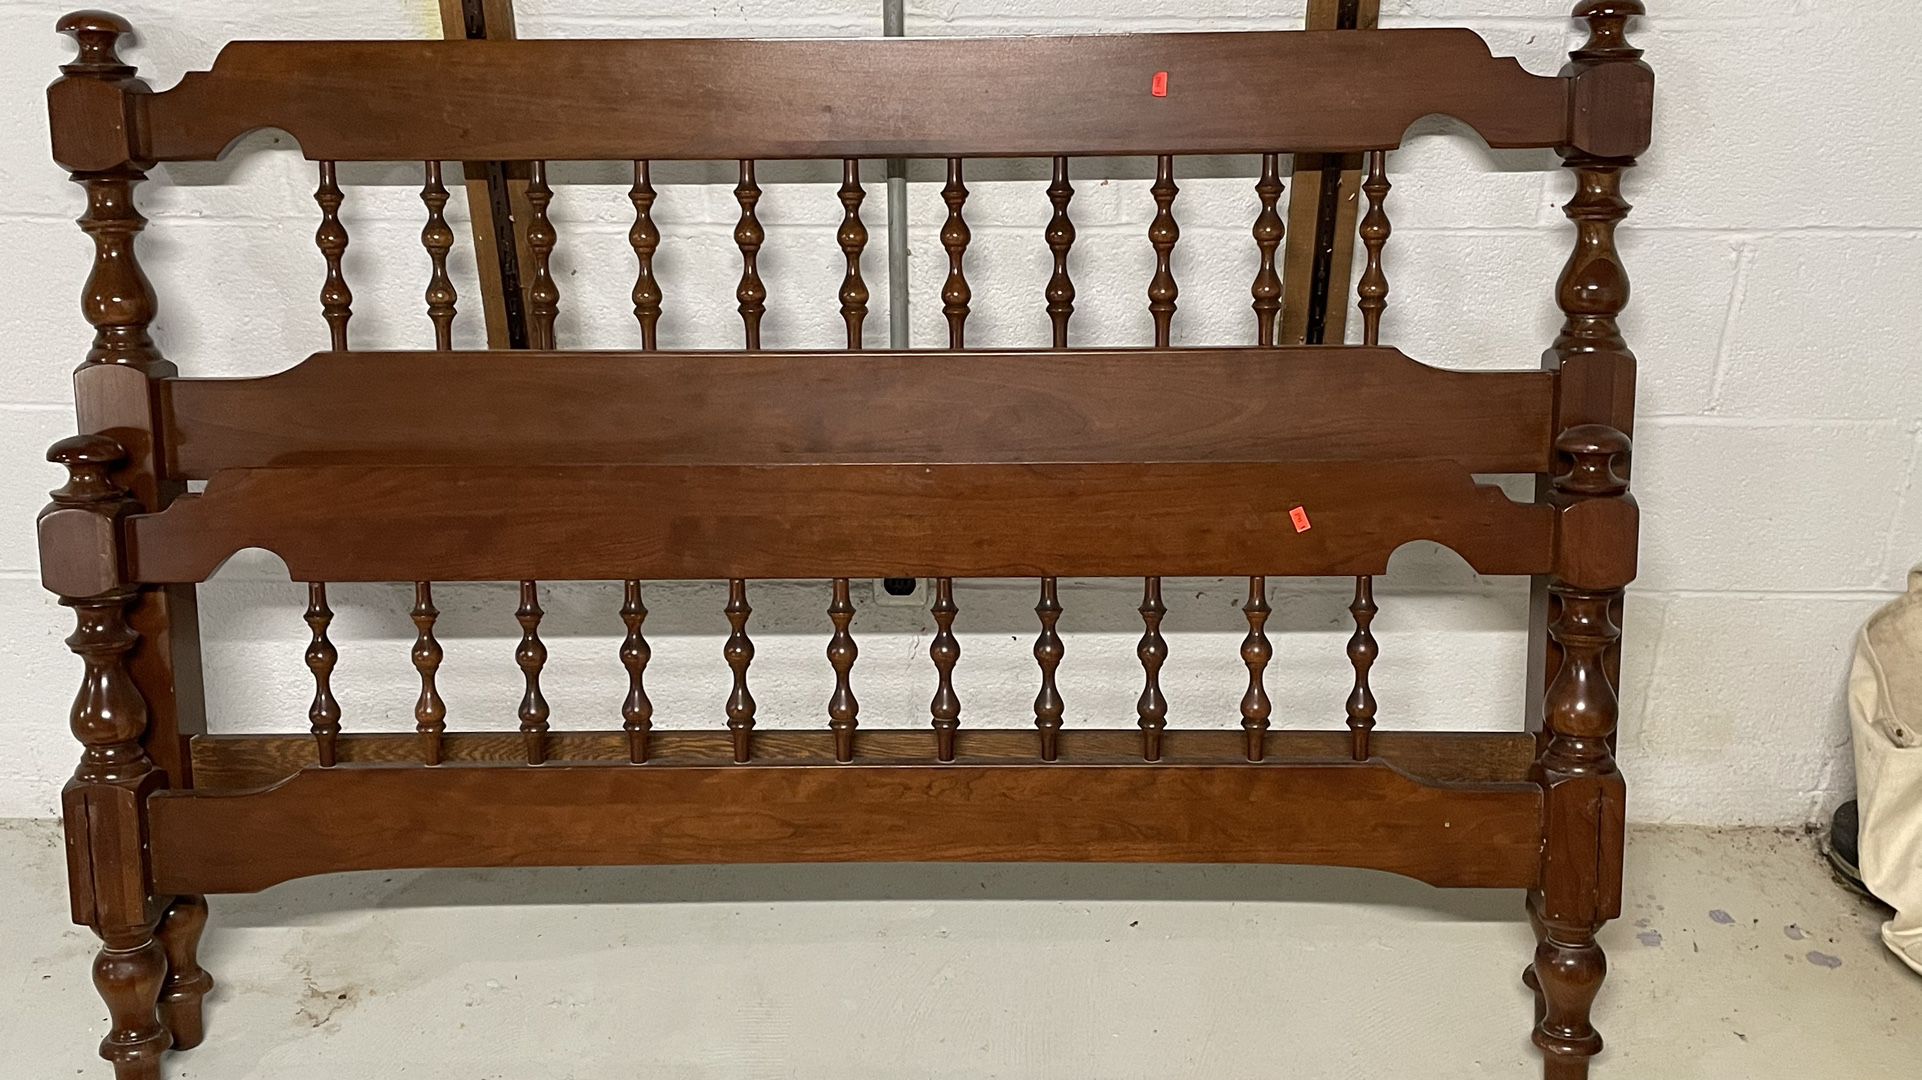 Wood Bed Frame - Full size - FREE